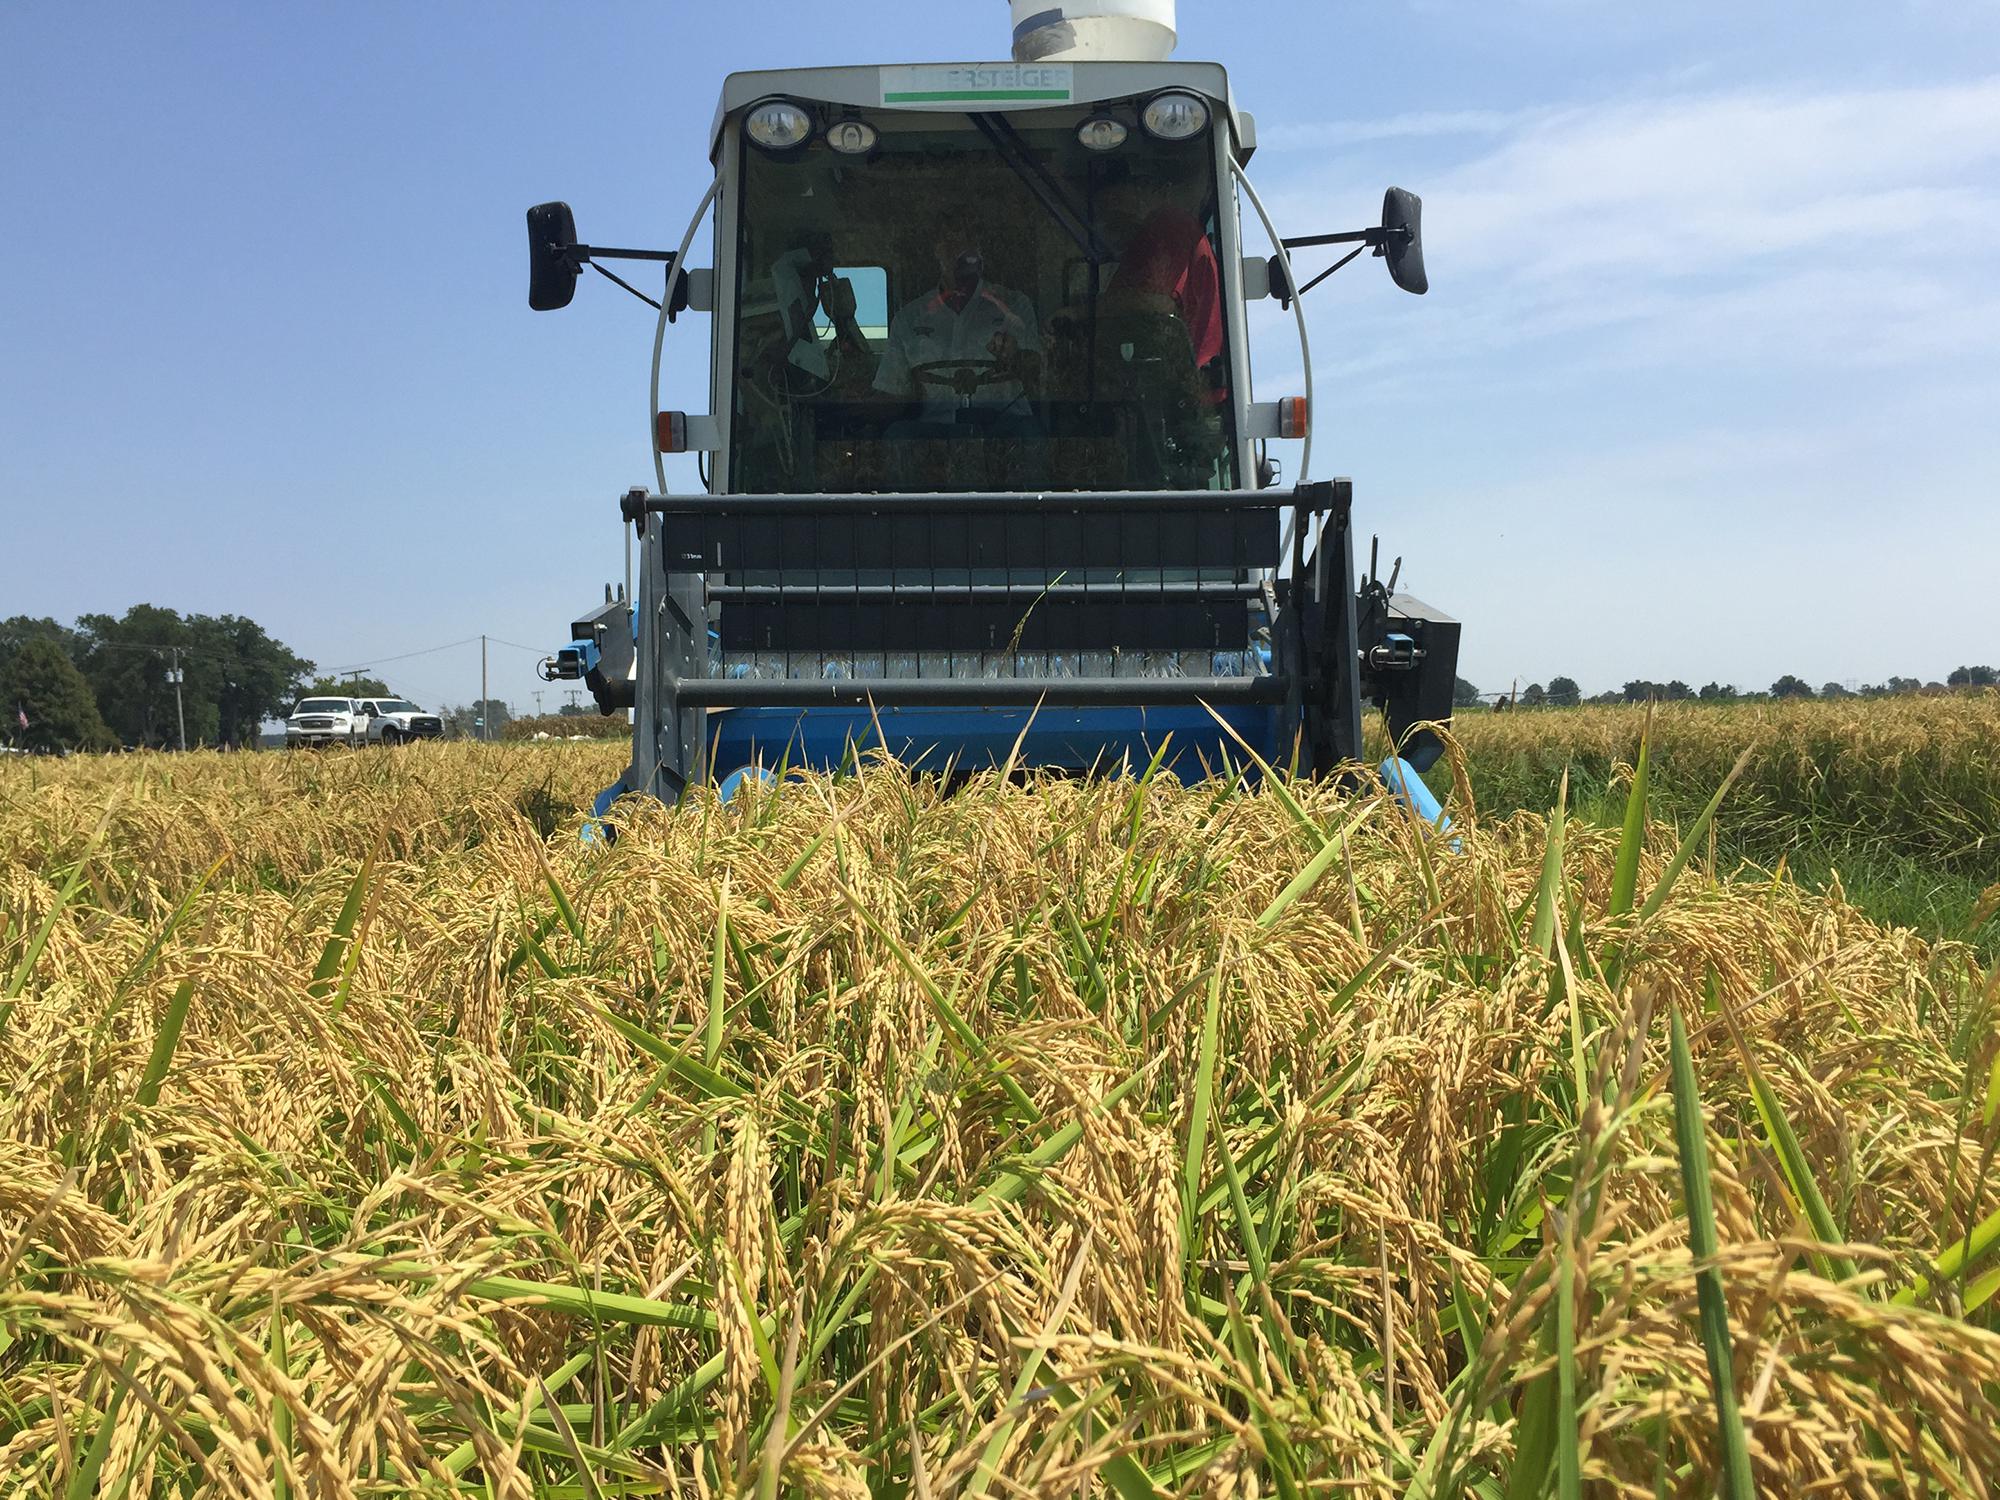 Mississippi State University field personnel begin the rice harvest on test plots at the Delta Research and Extension Center in Stoneville, Mississippi. (File photo by MSU Extension Service/Bobby Golden)